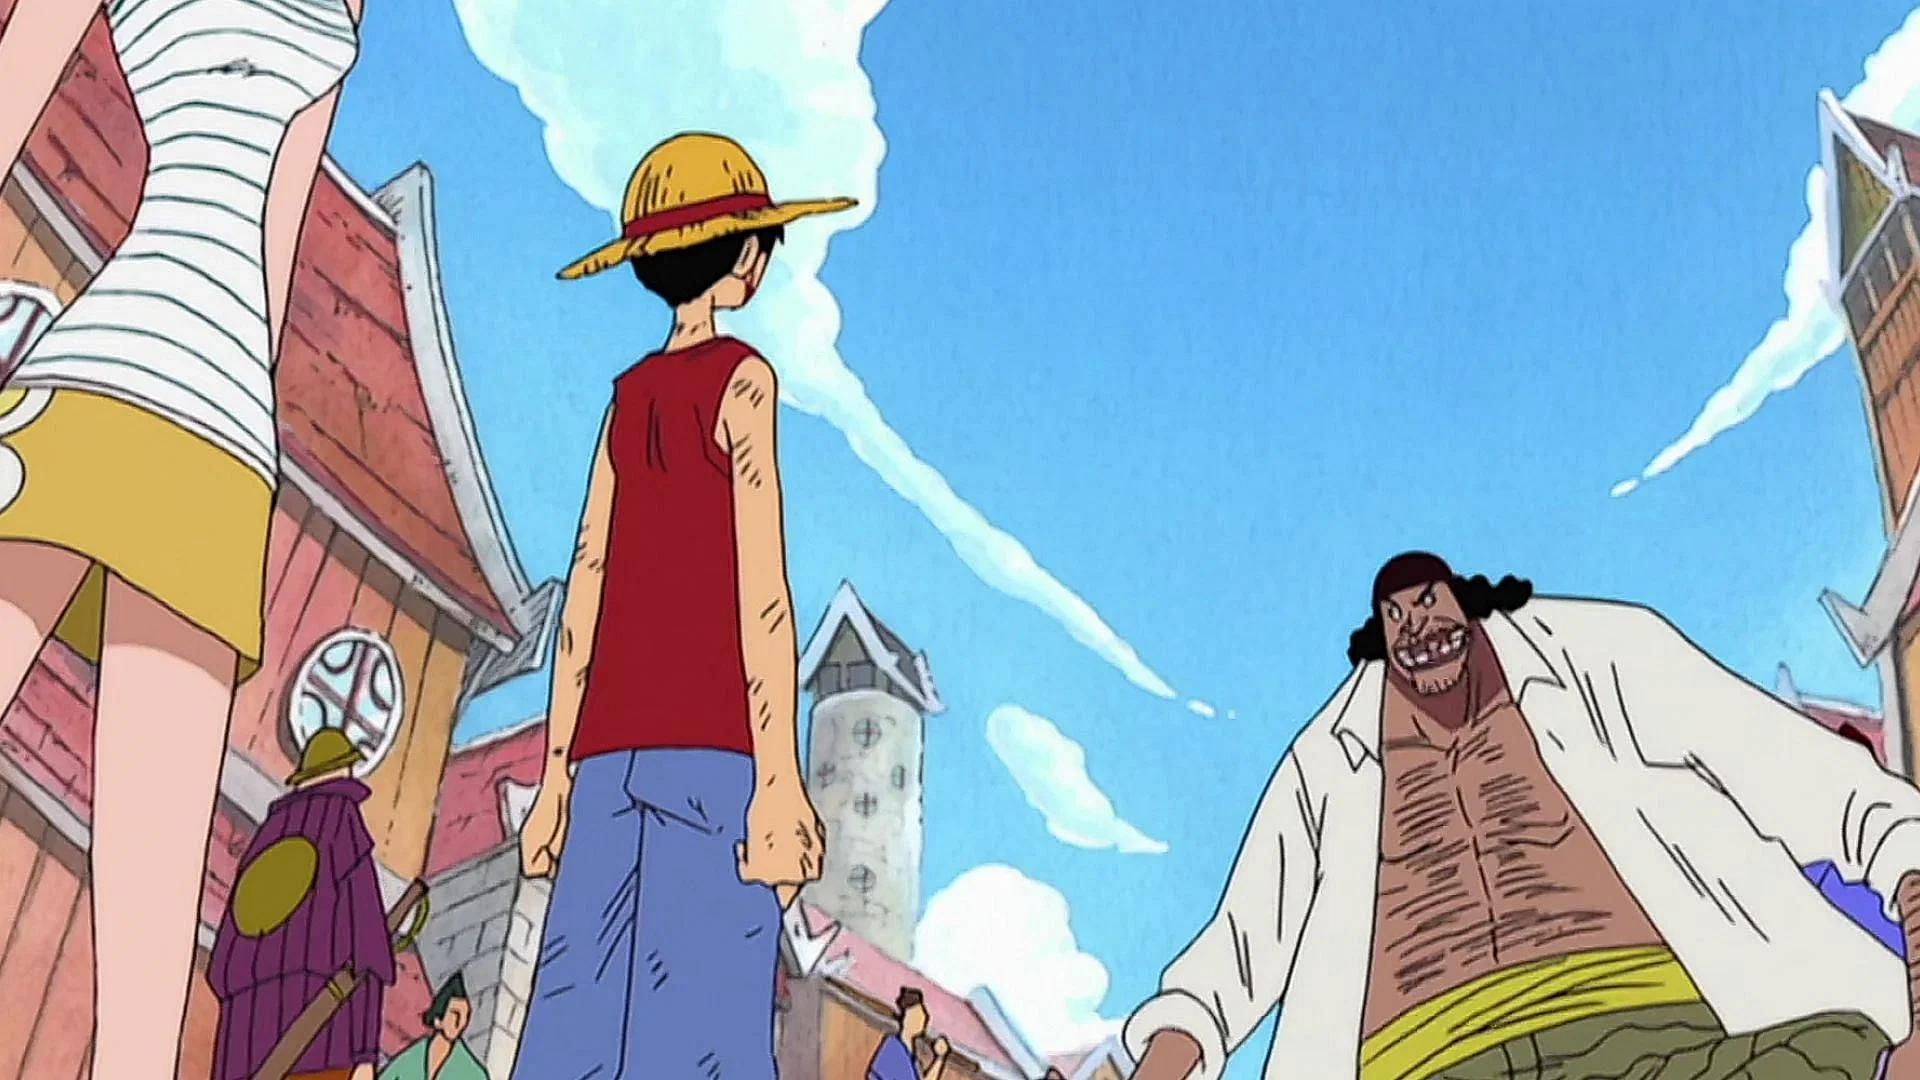 Monkey D. Luffy will likely face off against Blackbeard in the finale (Image via Toei Animation)